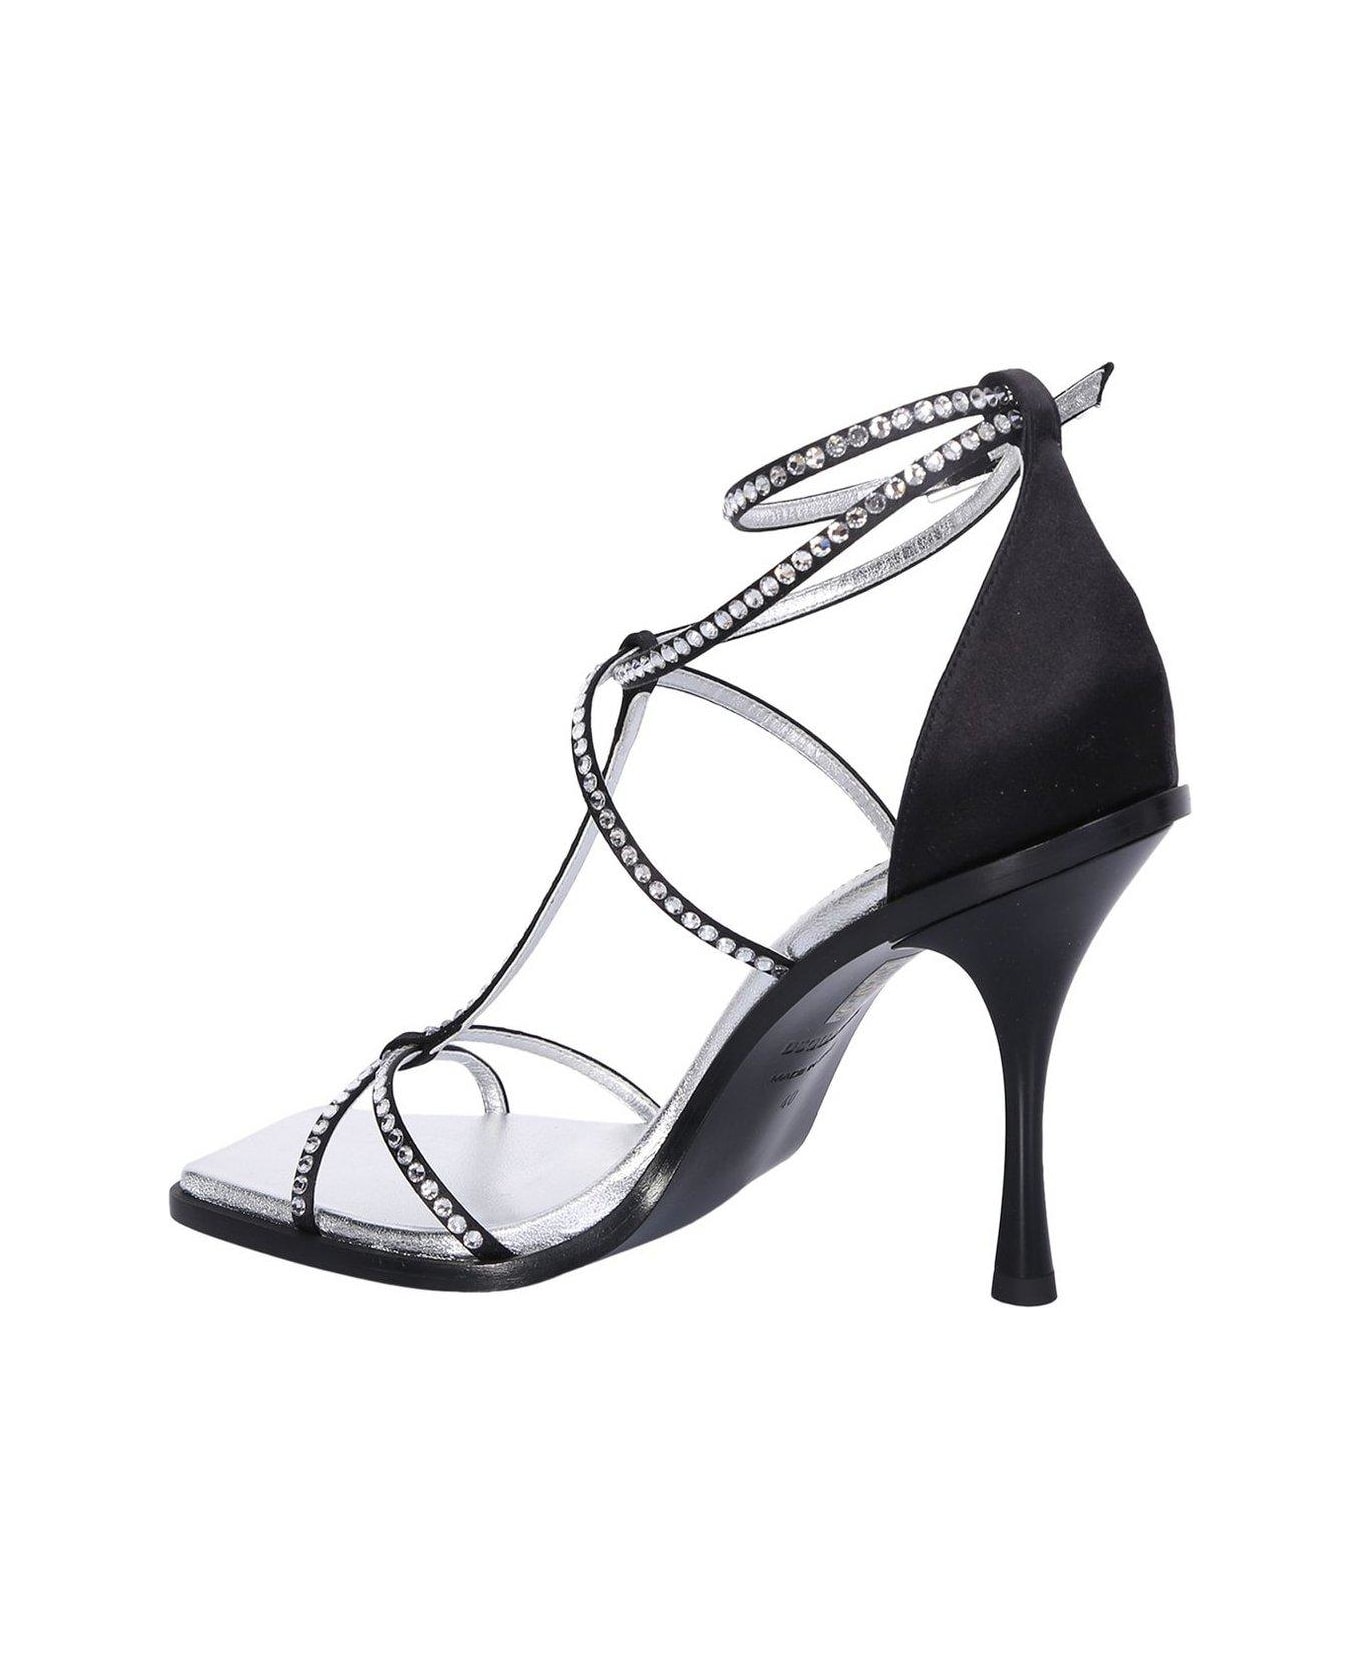 Dsquared2 Holiday Party Ankle Strap Sandals - Black